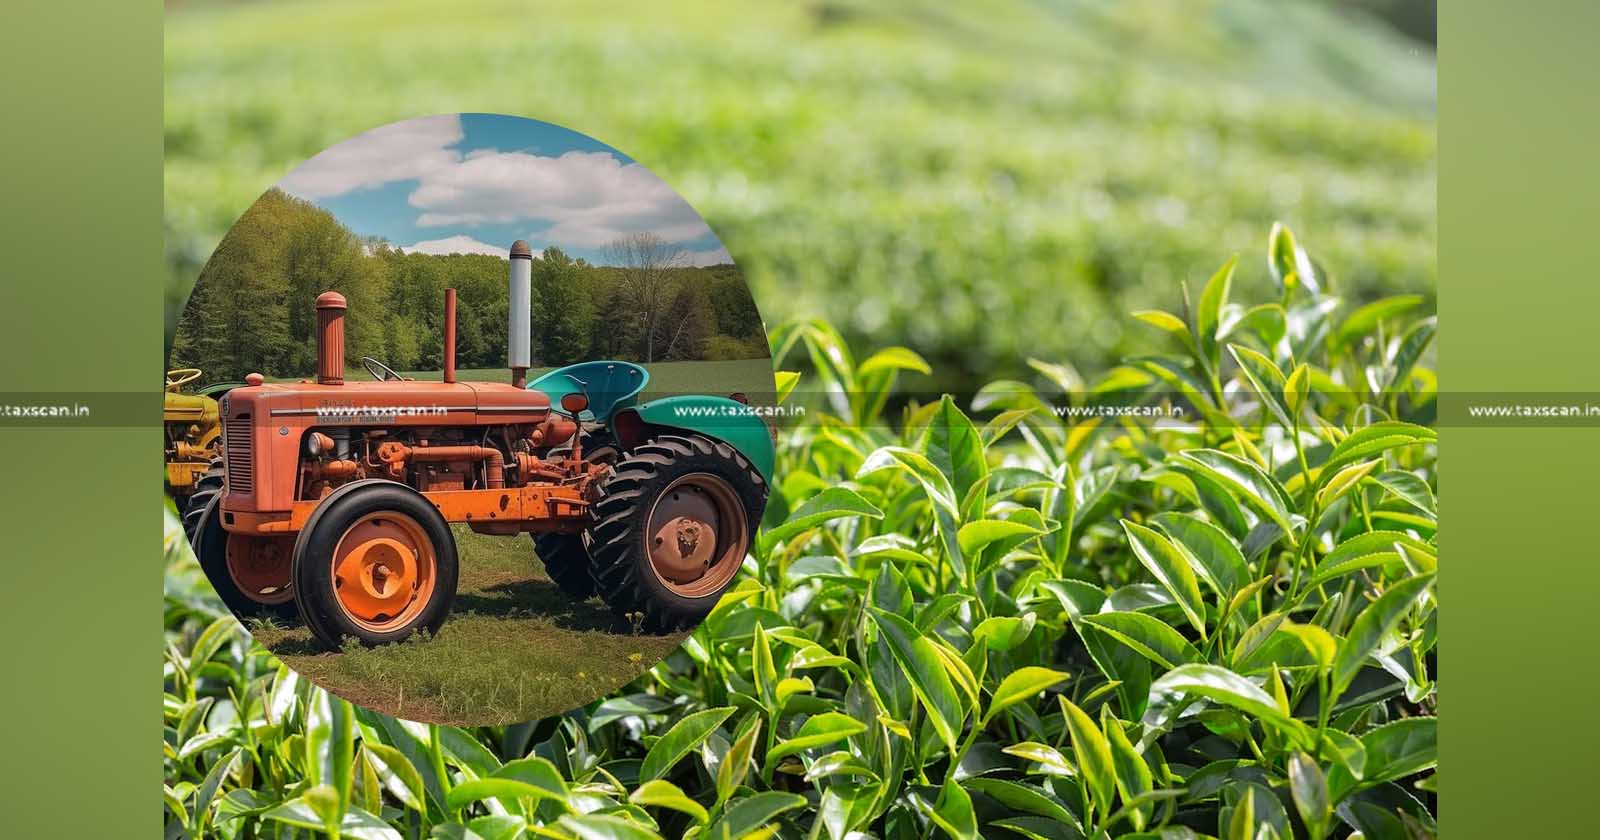 Tax Exemption Claim on Tractors Used in Tea Garden - Calcutta High Court - Calcutta High Court directs to Consider Exemption Claim - West Bengal Motor Vehicle Tax Act - Tractors - Taxscan